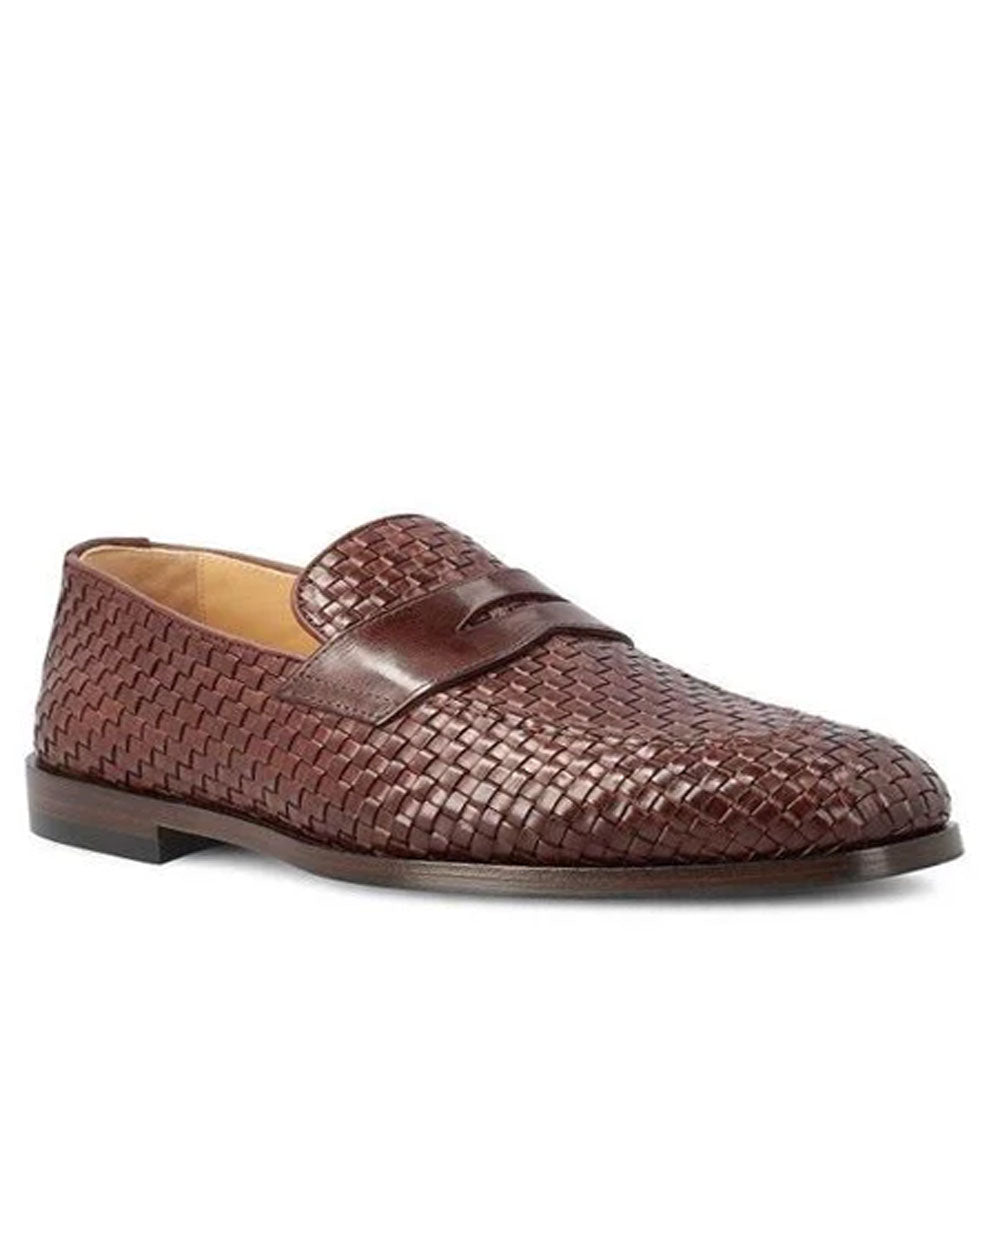 Penny Slot Woven Leather Loafer in Brown